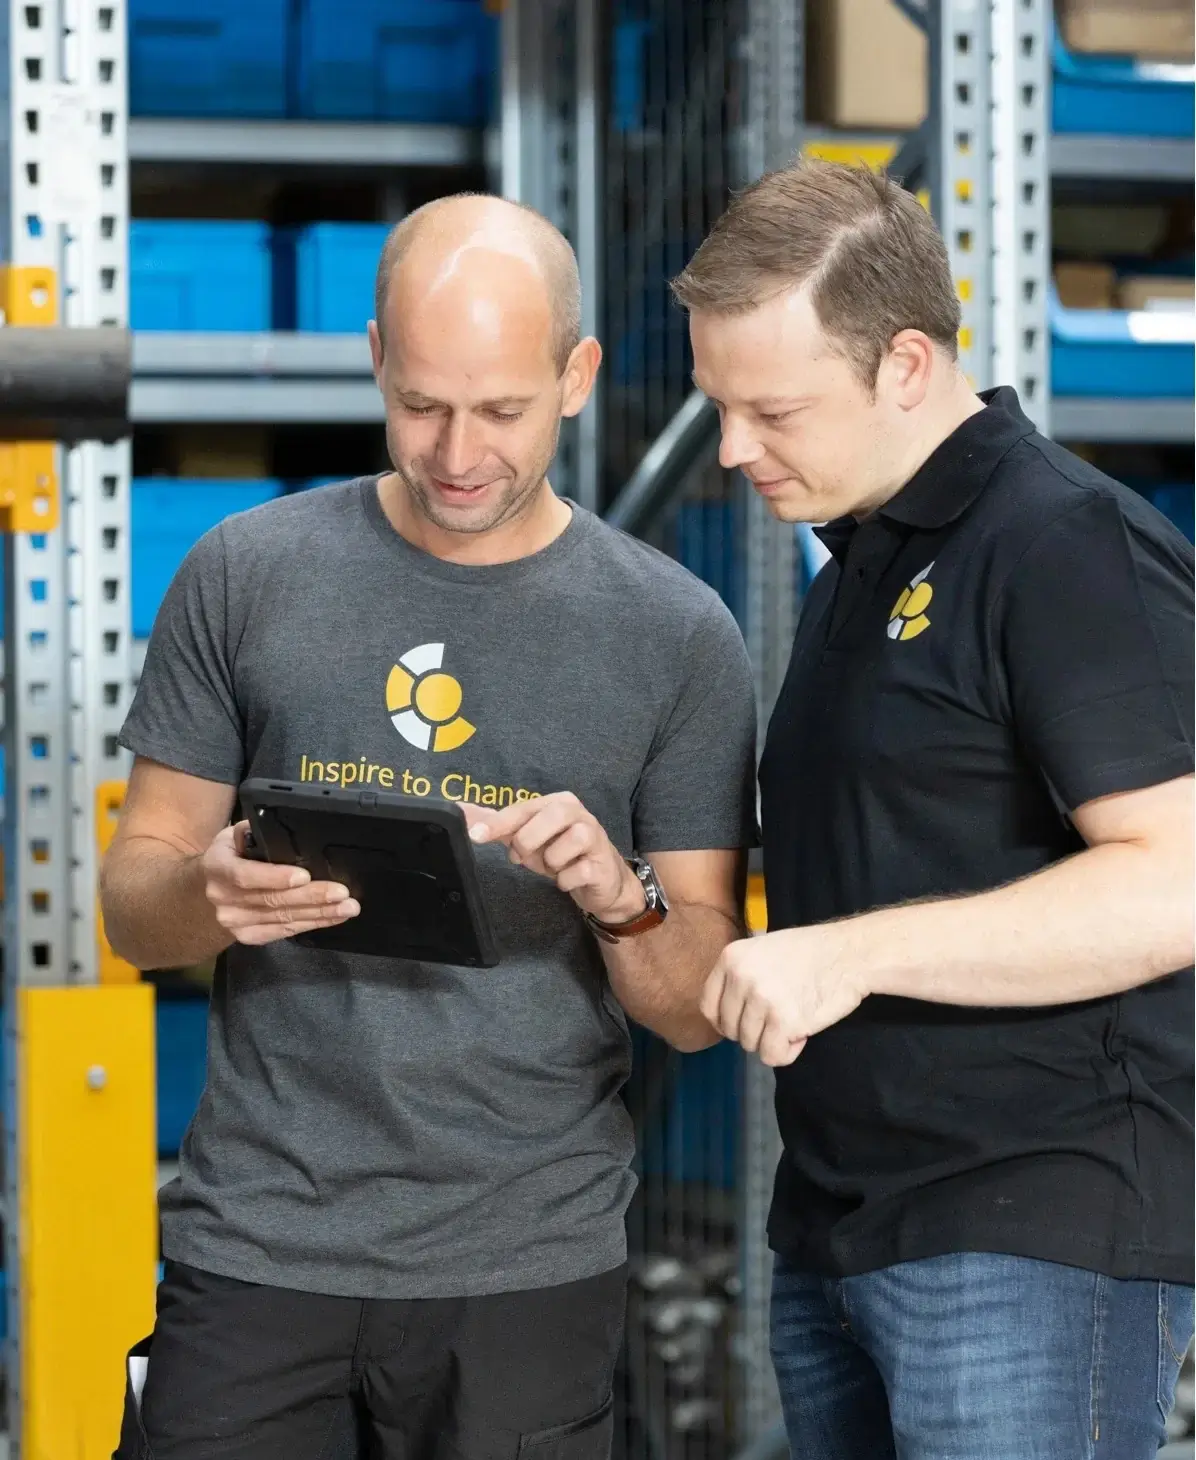 2 Developers checking an App on a tablet